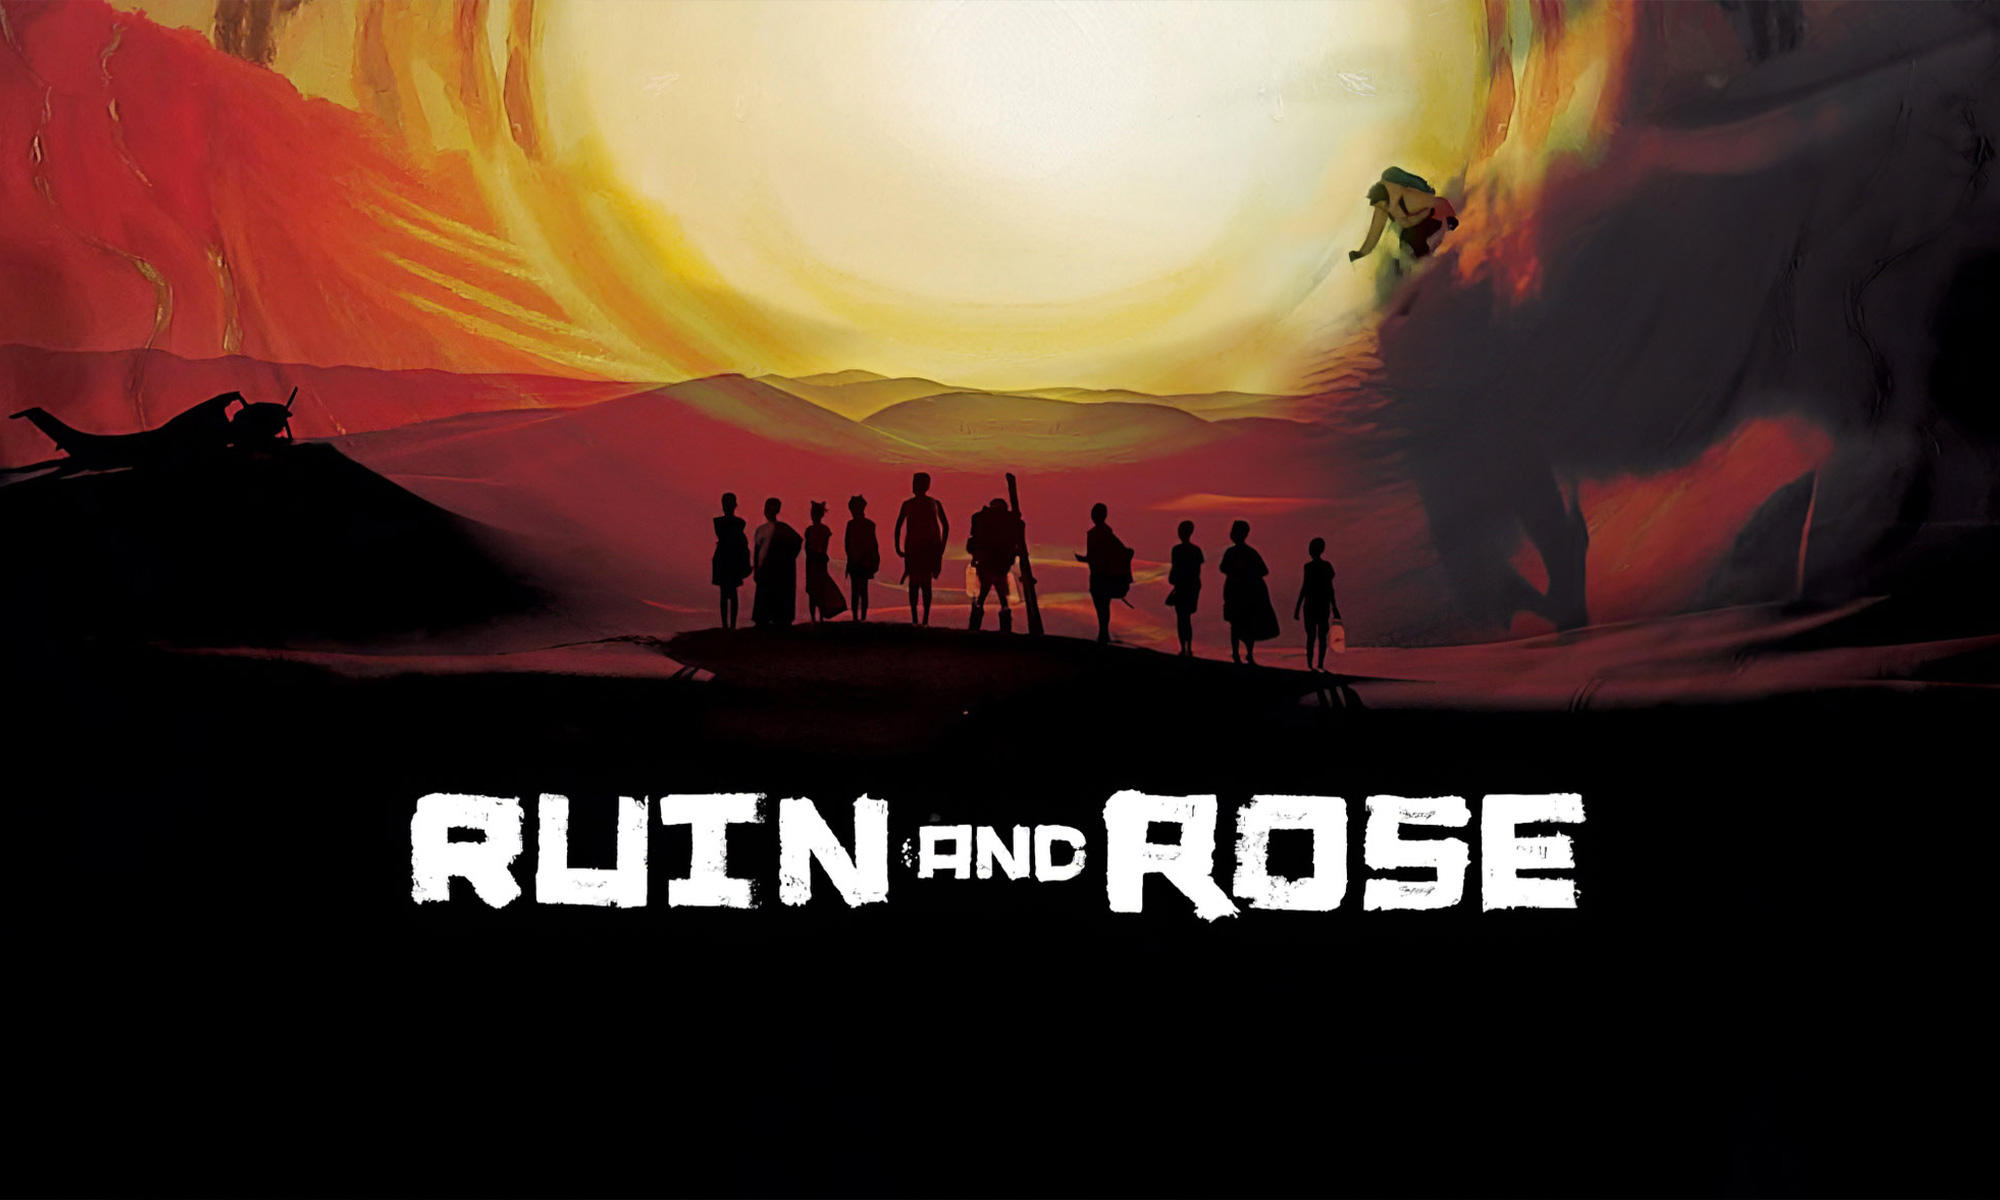 Ruin and Rose